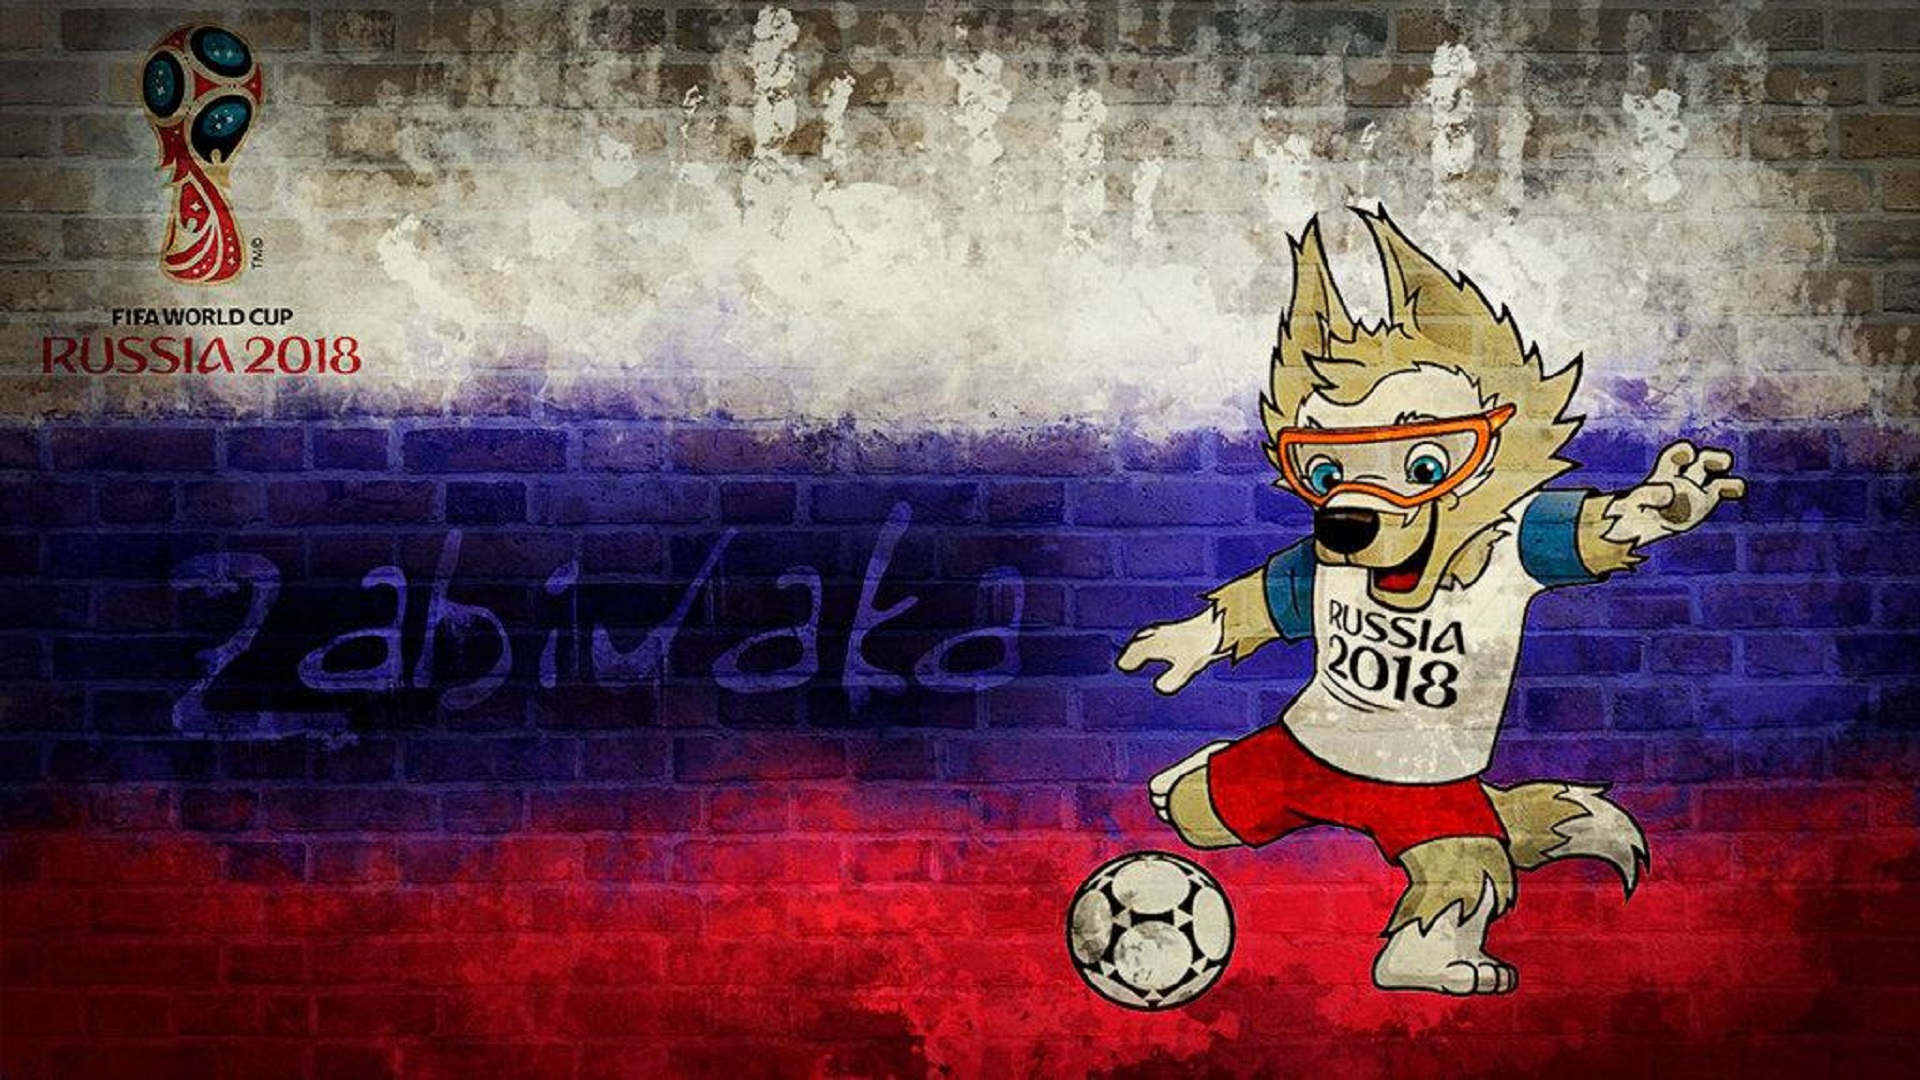 Fifa World Cup 2018 Russia Wallpaper Hd Visual Arts Ideas Total Update - roblox harvesting simulator codes augustseptember 2018 out